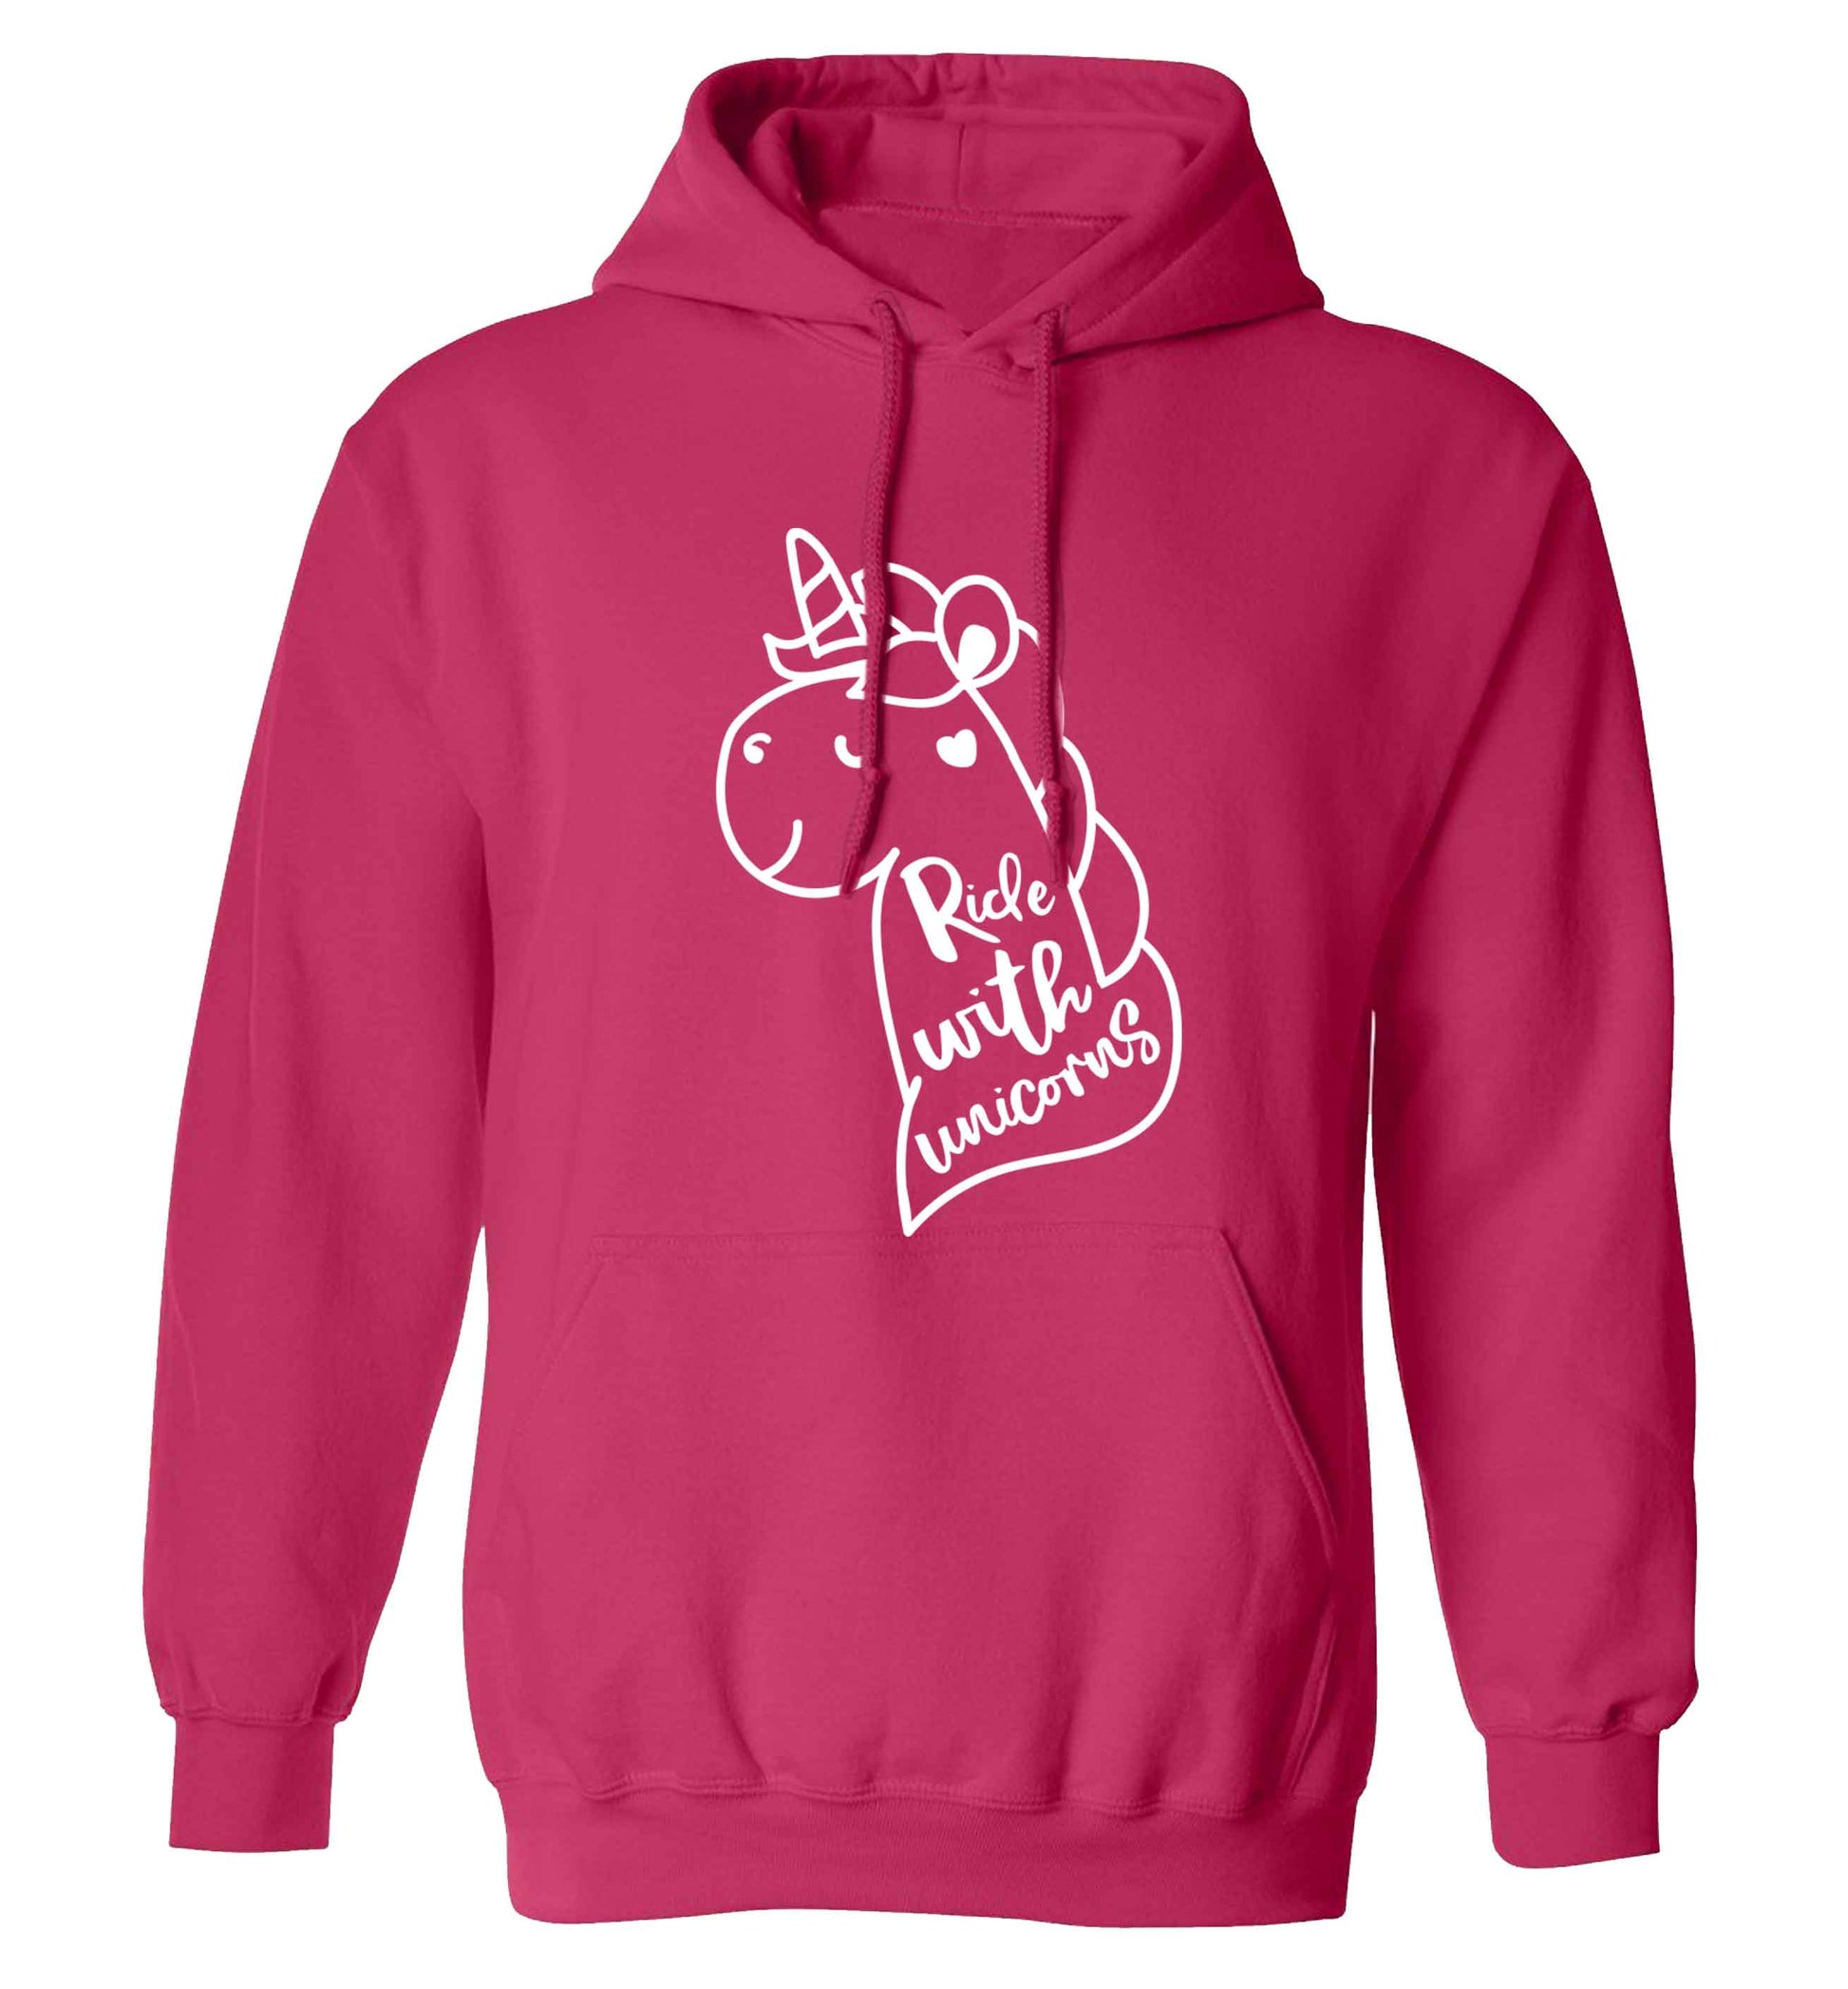 Ride with unicorns adults unisex pink hoodie 2XL